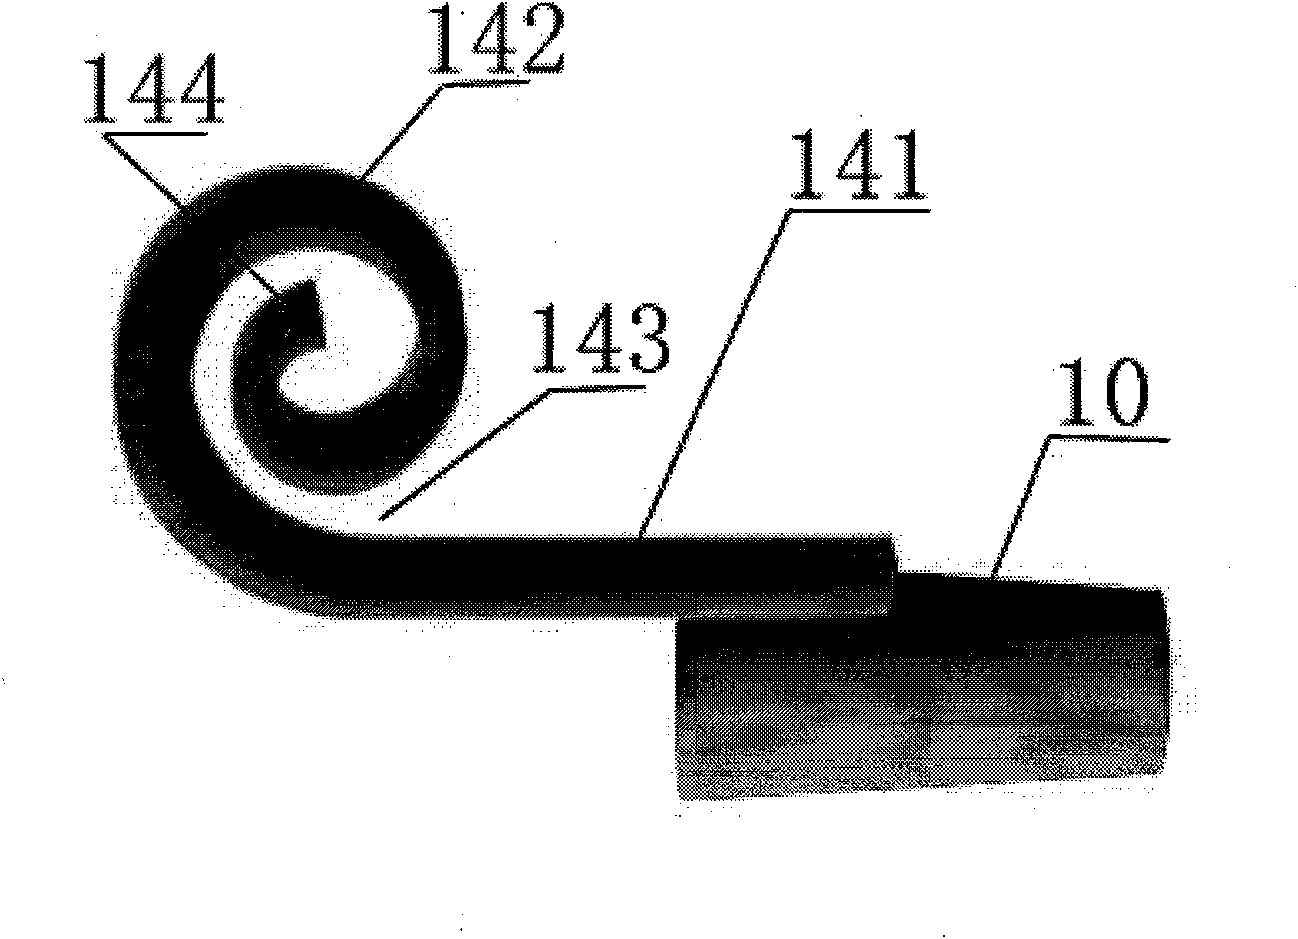 Underwater installation recoverer and recovery method thereof